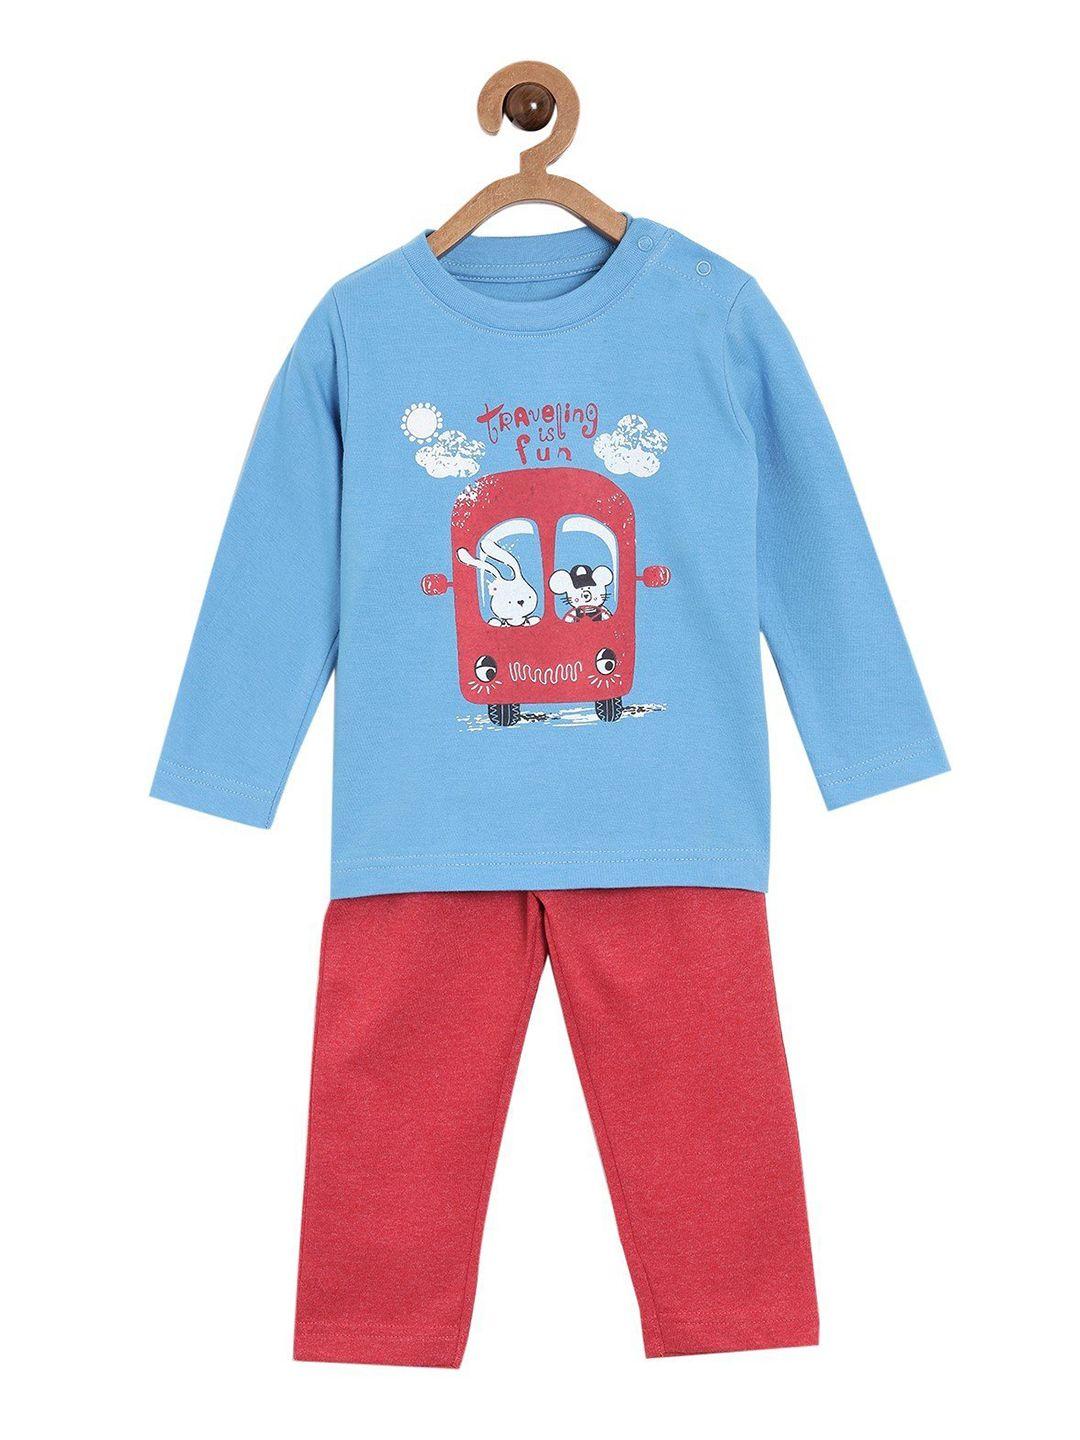 the mom store unisex kids blue & red printed cotton top with pyjamas